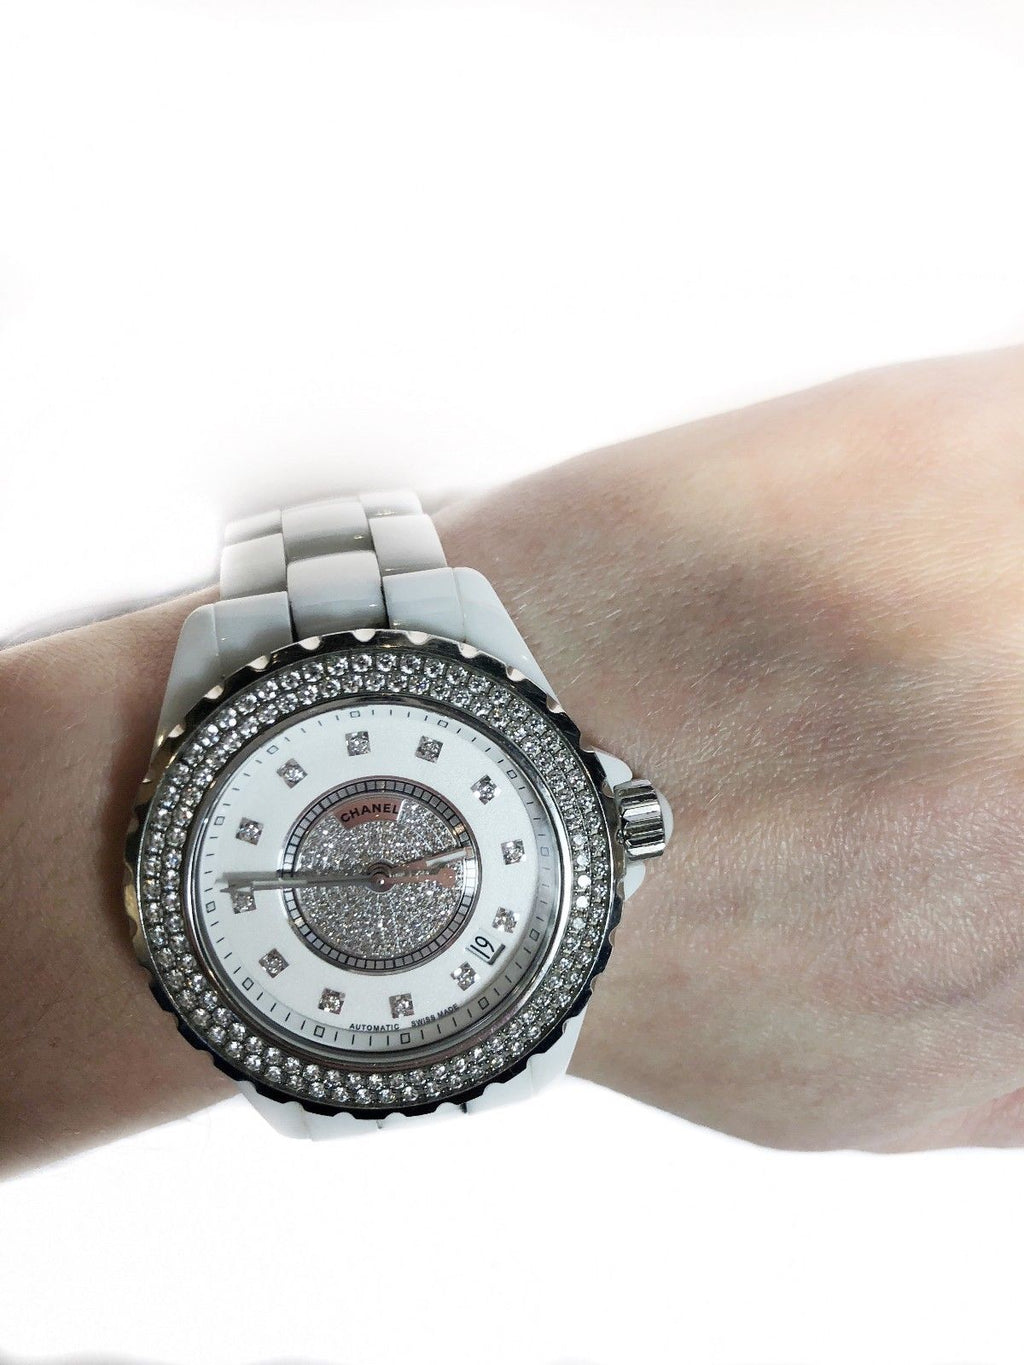 Chanel Watch Ladies J12 Diamond Date Quartz Ceramic Stainless for $3,758  for sale from a Trusted Seller on Chrono24